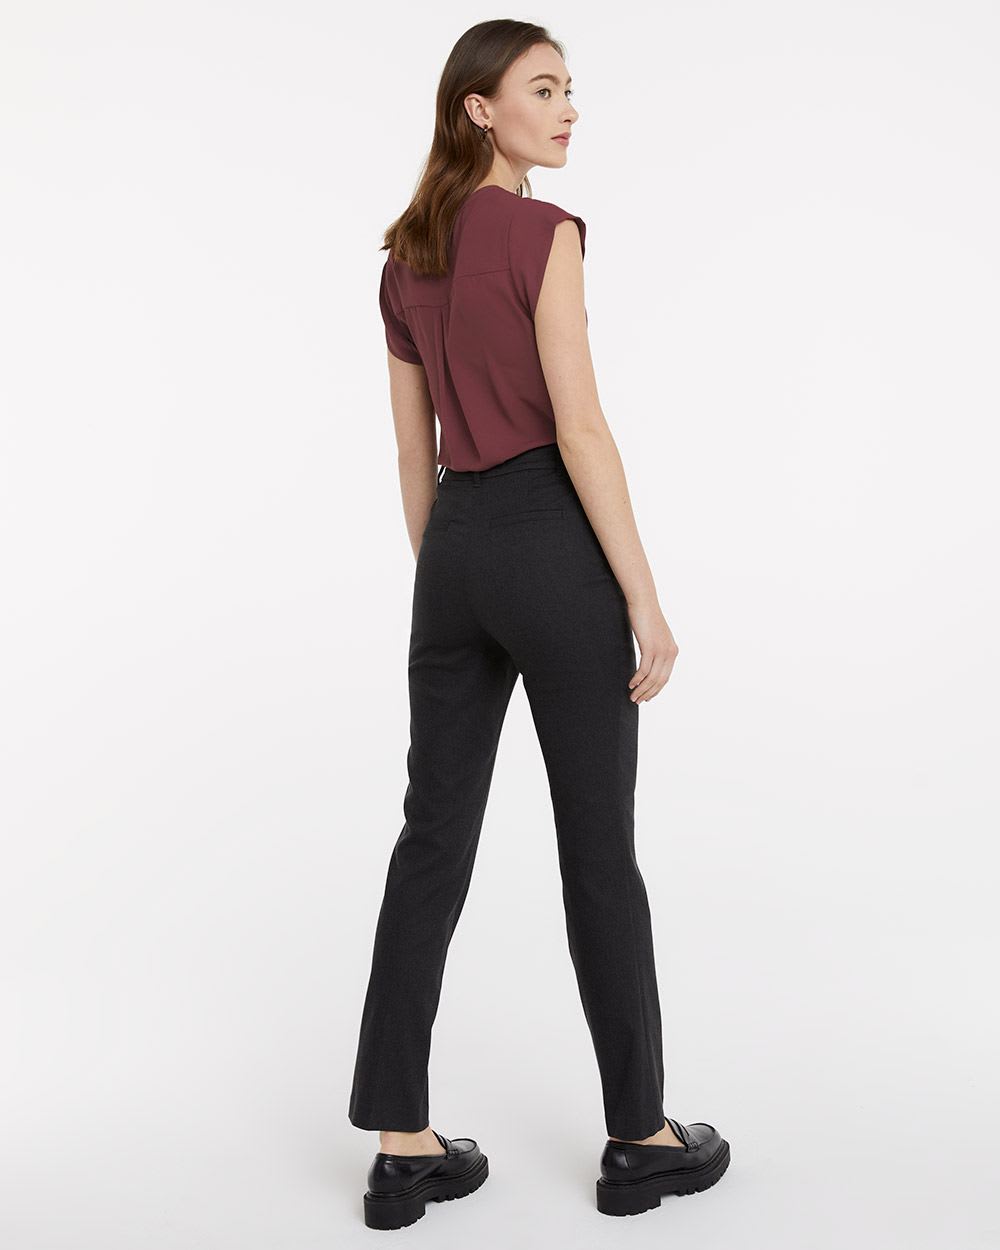 High-Rise Grey Pants with Straight Leg, The Iconic - Petite